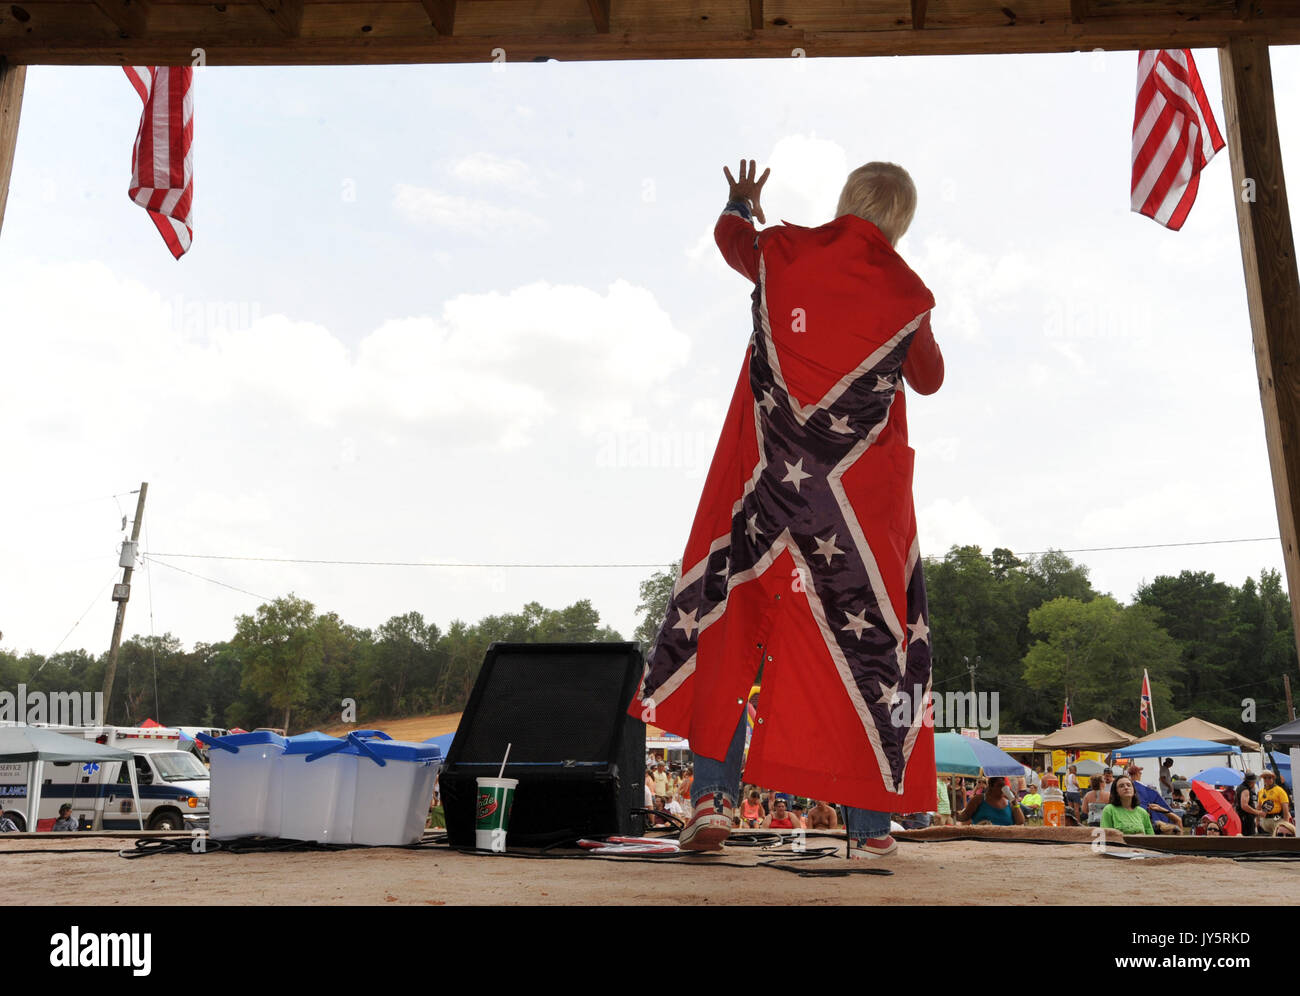 East Dublin, Georgia, USA. 11th Mar, 2008. Ronnie Mullis sports a Confederate Battle flag cape while performing at the 13th annual Summer Redneck Games at Buckeye Park in East Dublin, Georgia, on Saturday. The annual homage to Southerners, began as a spoof to the 1996 Summer Olympics in Atlanta. Thousands of revelers attend the event whose events include bobbing for pigs feet, the mud pit belly flop and armpit serenade. (Credit Image: © Erik Lesser/ZUMA Press) Stock Photo